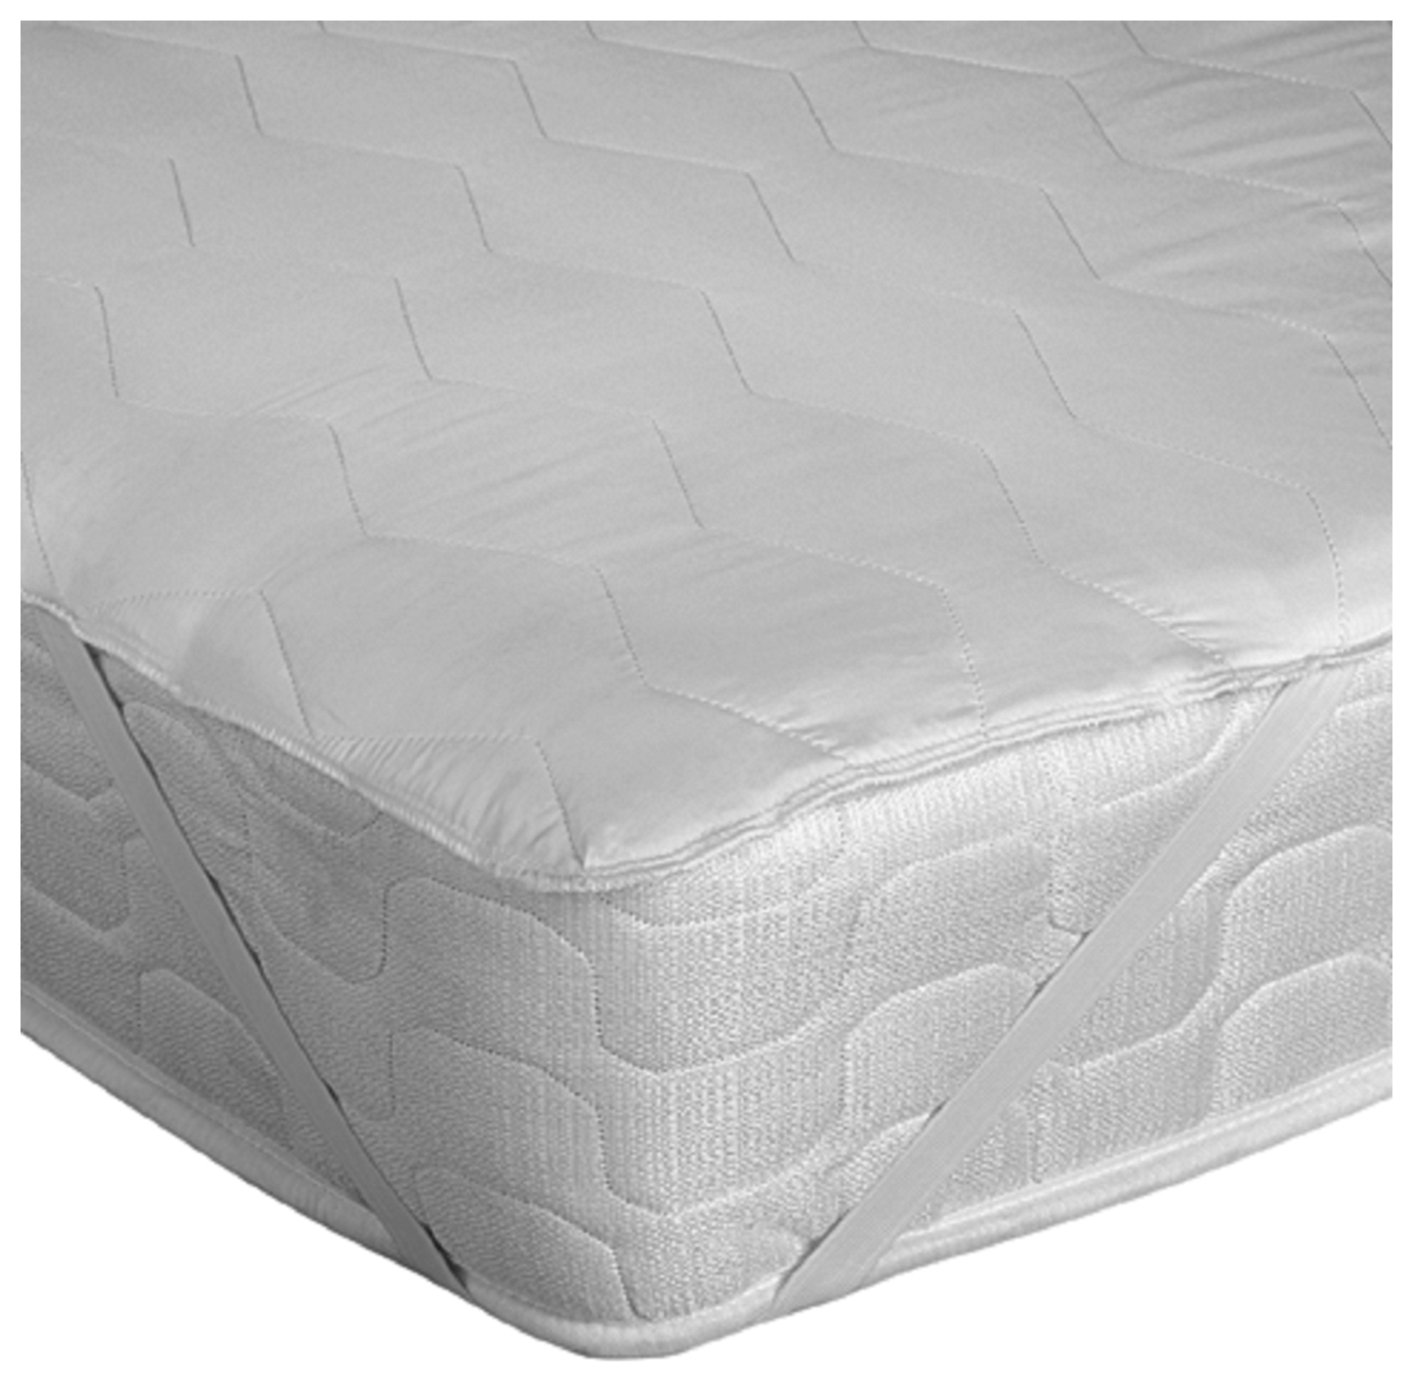 Argos Home Quilted Mattress Protector - Double